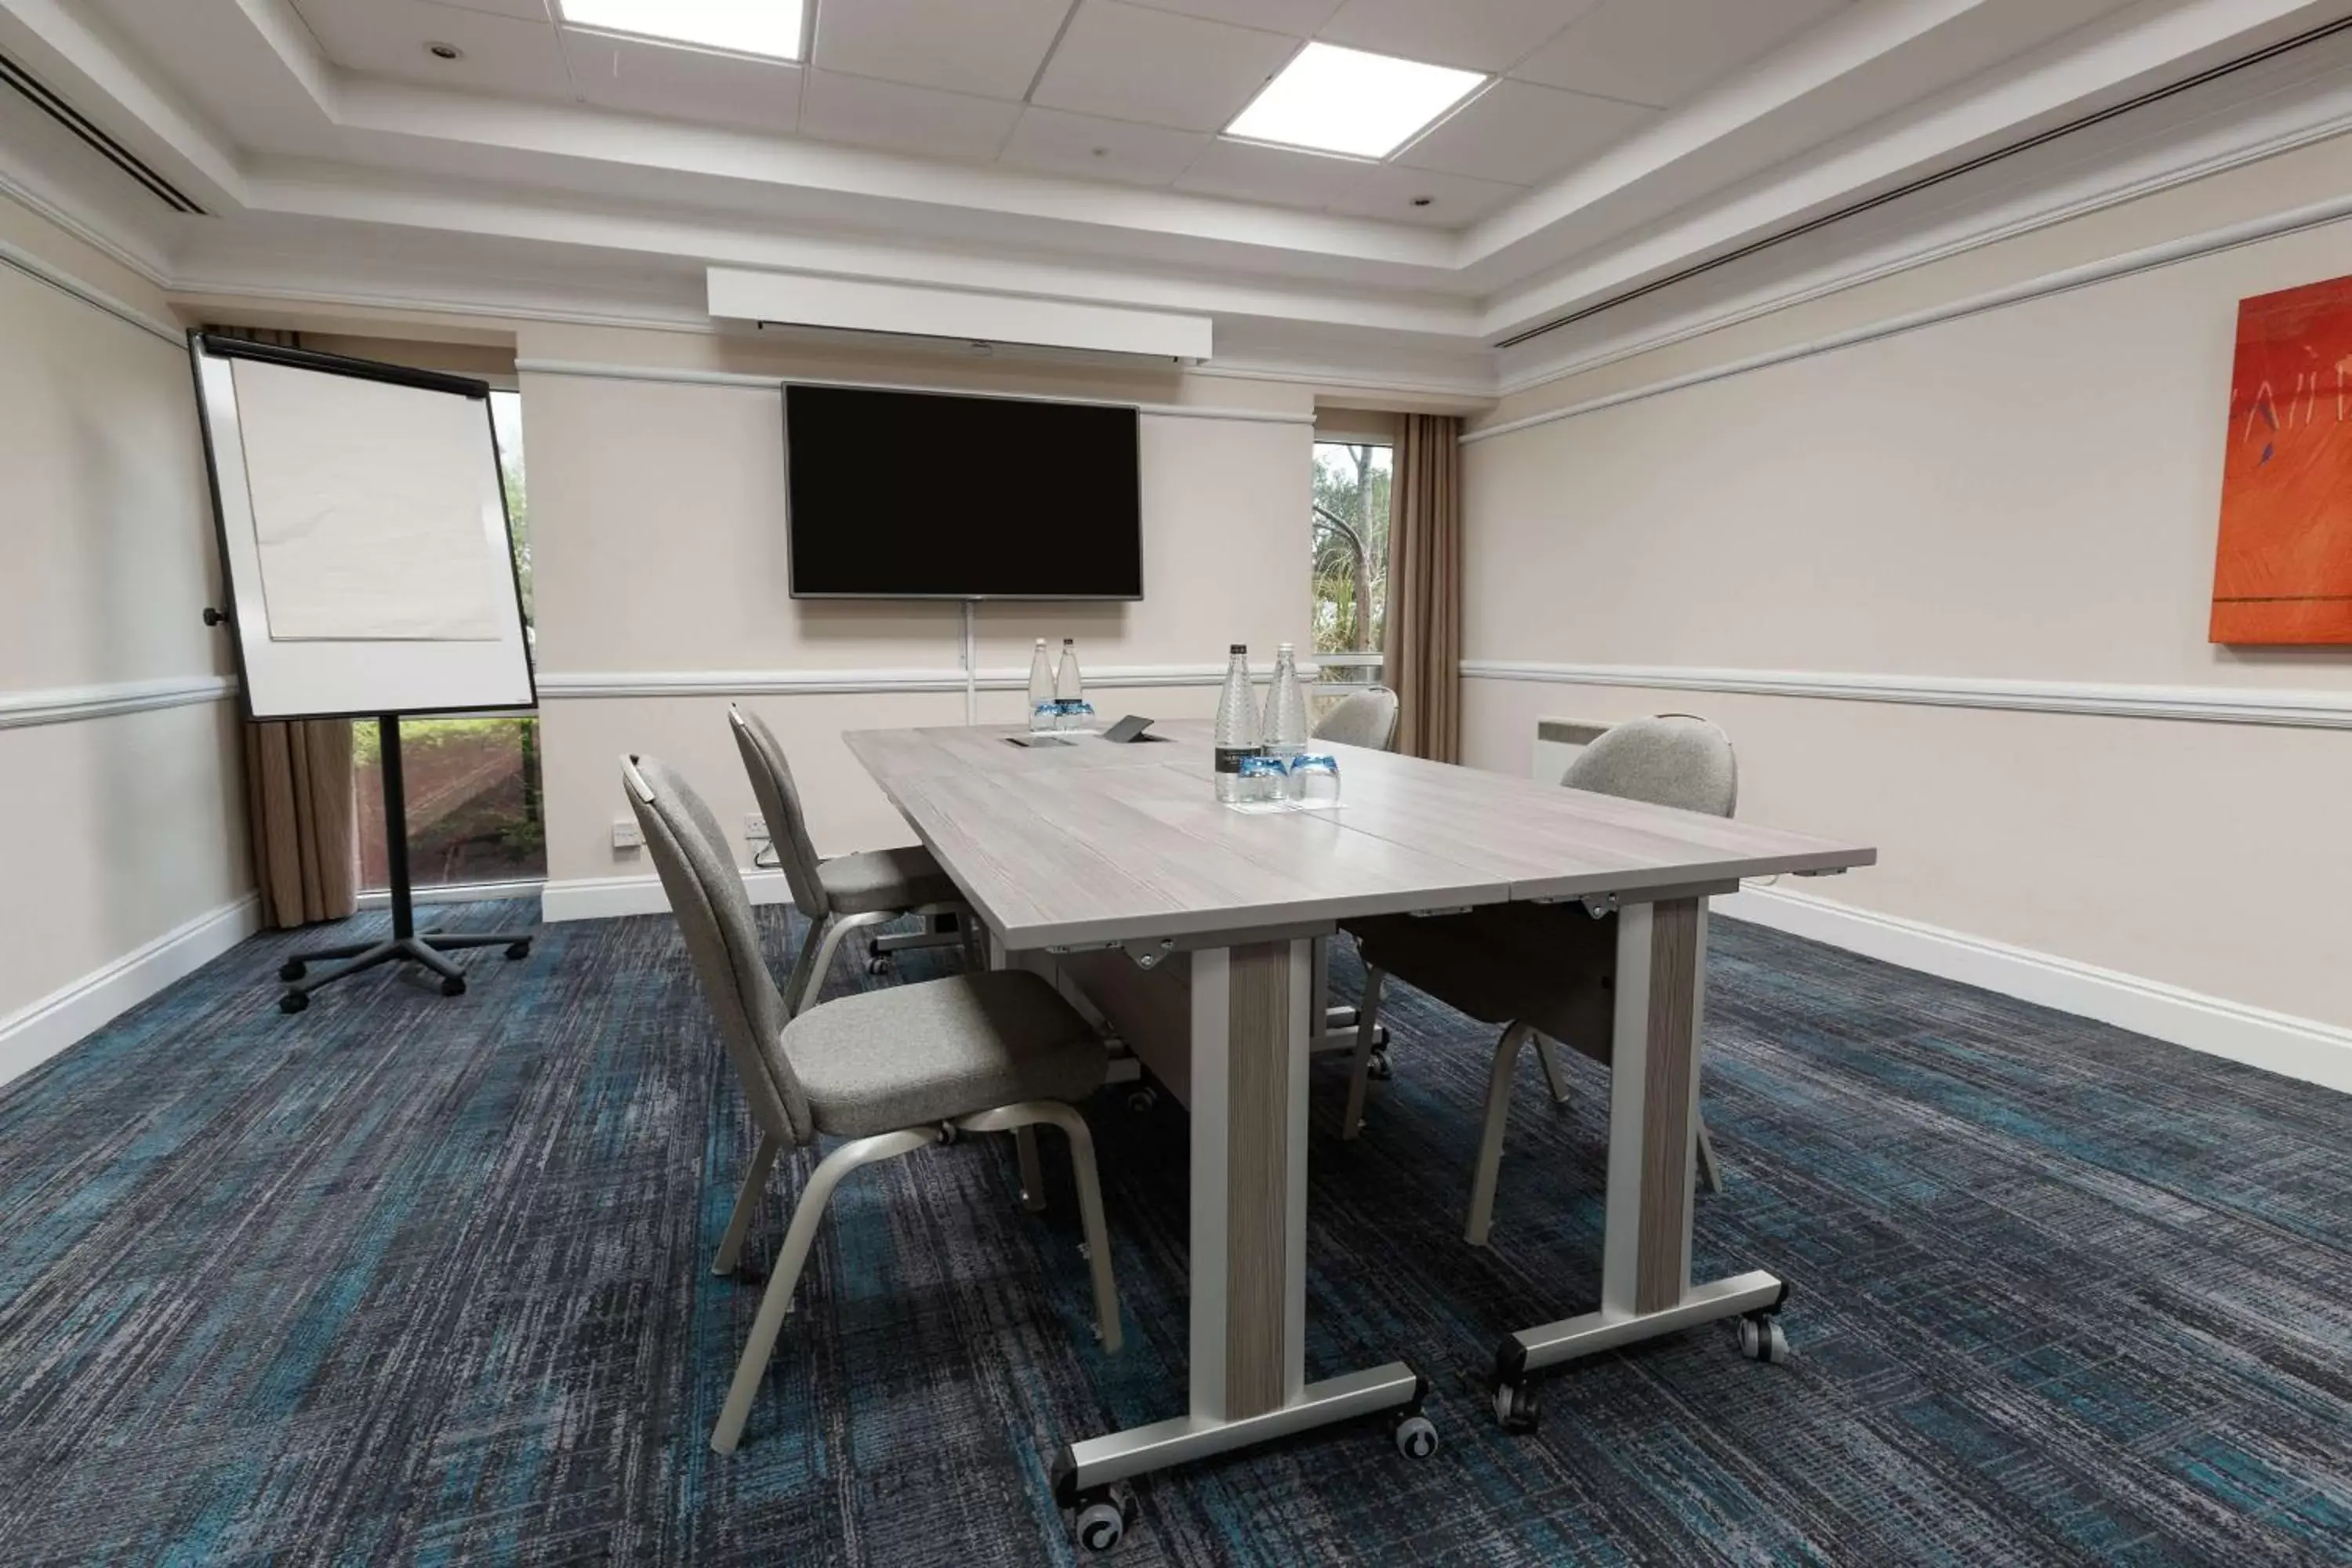 Meeting/conference room in Hilton Northampton Hotel